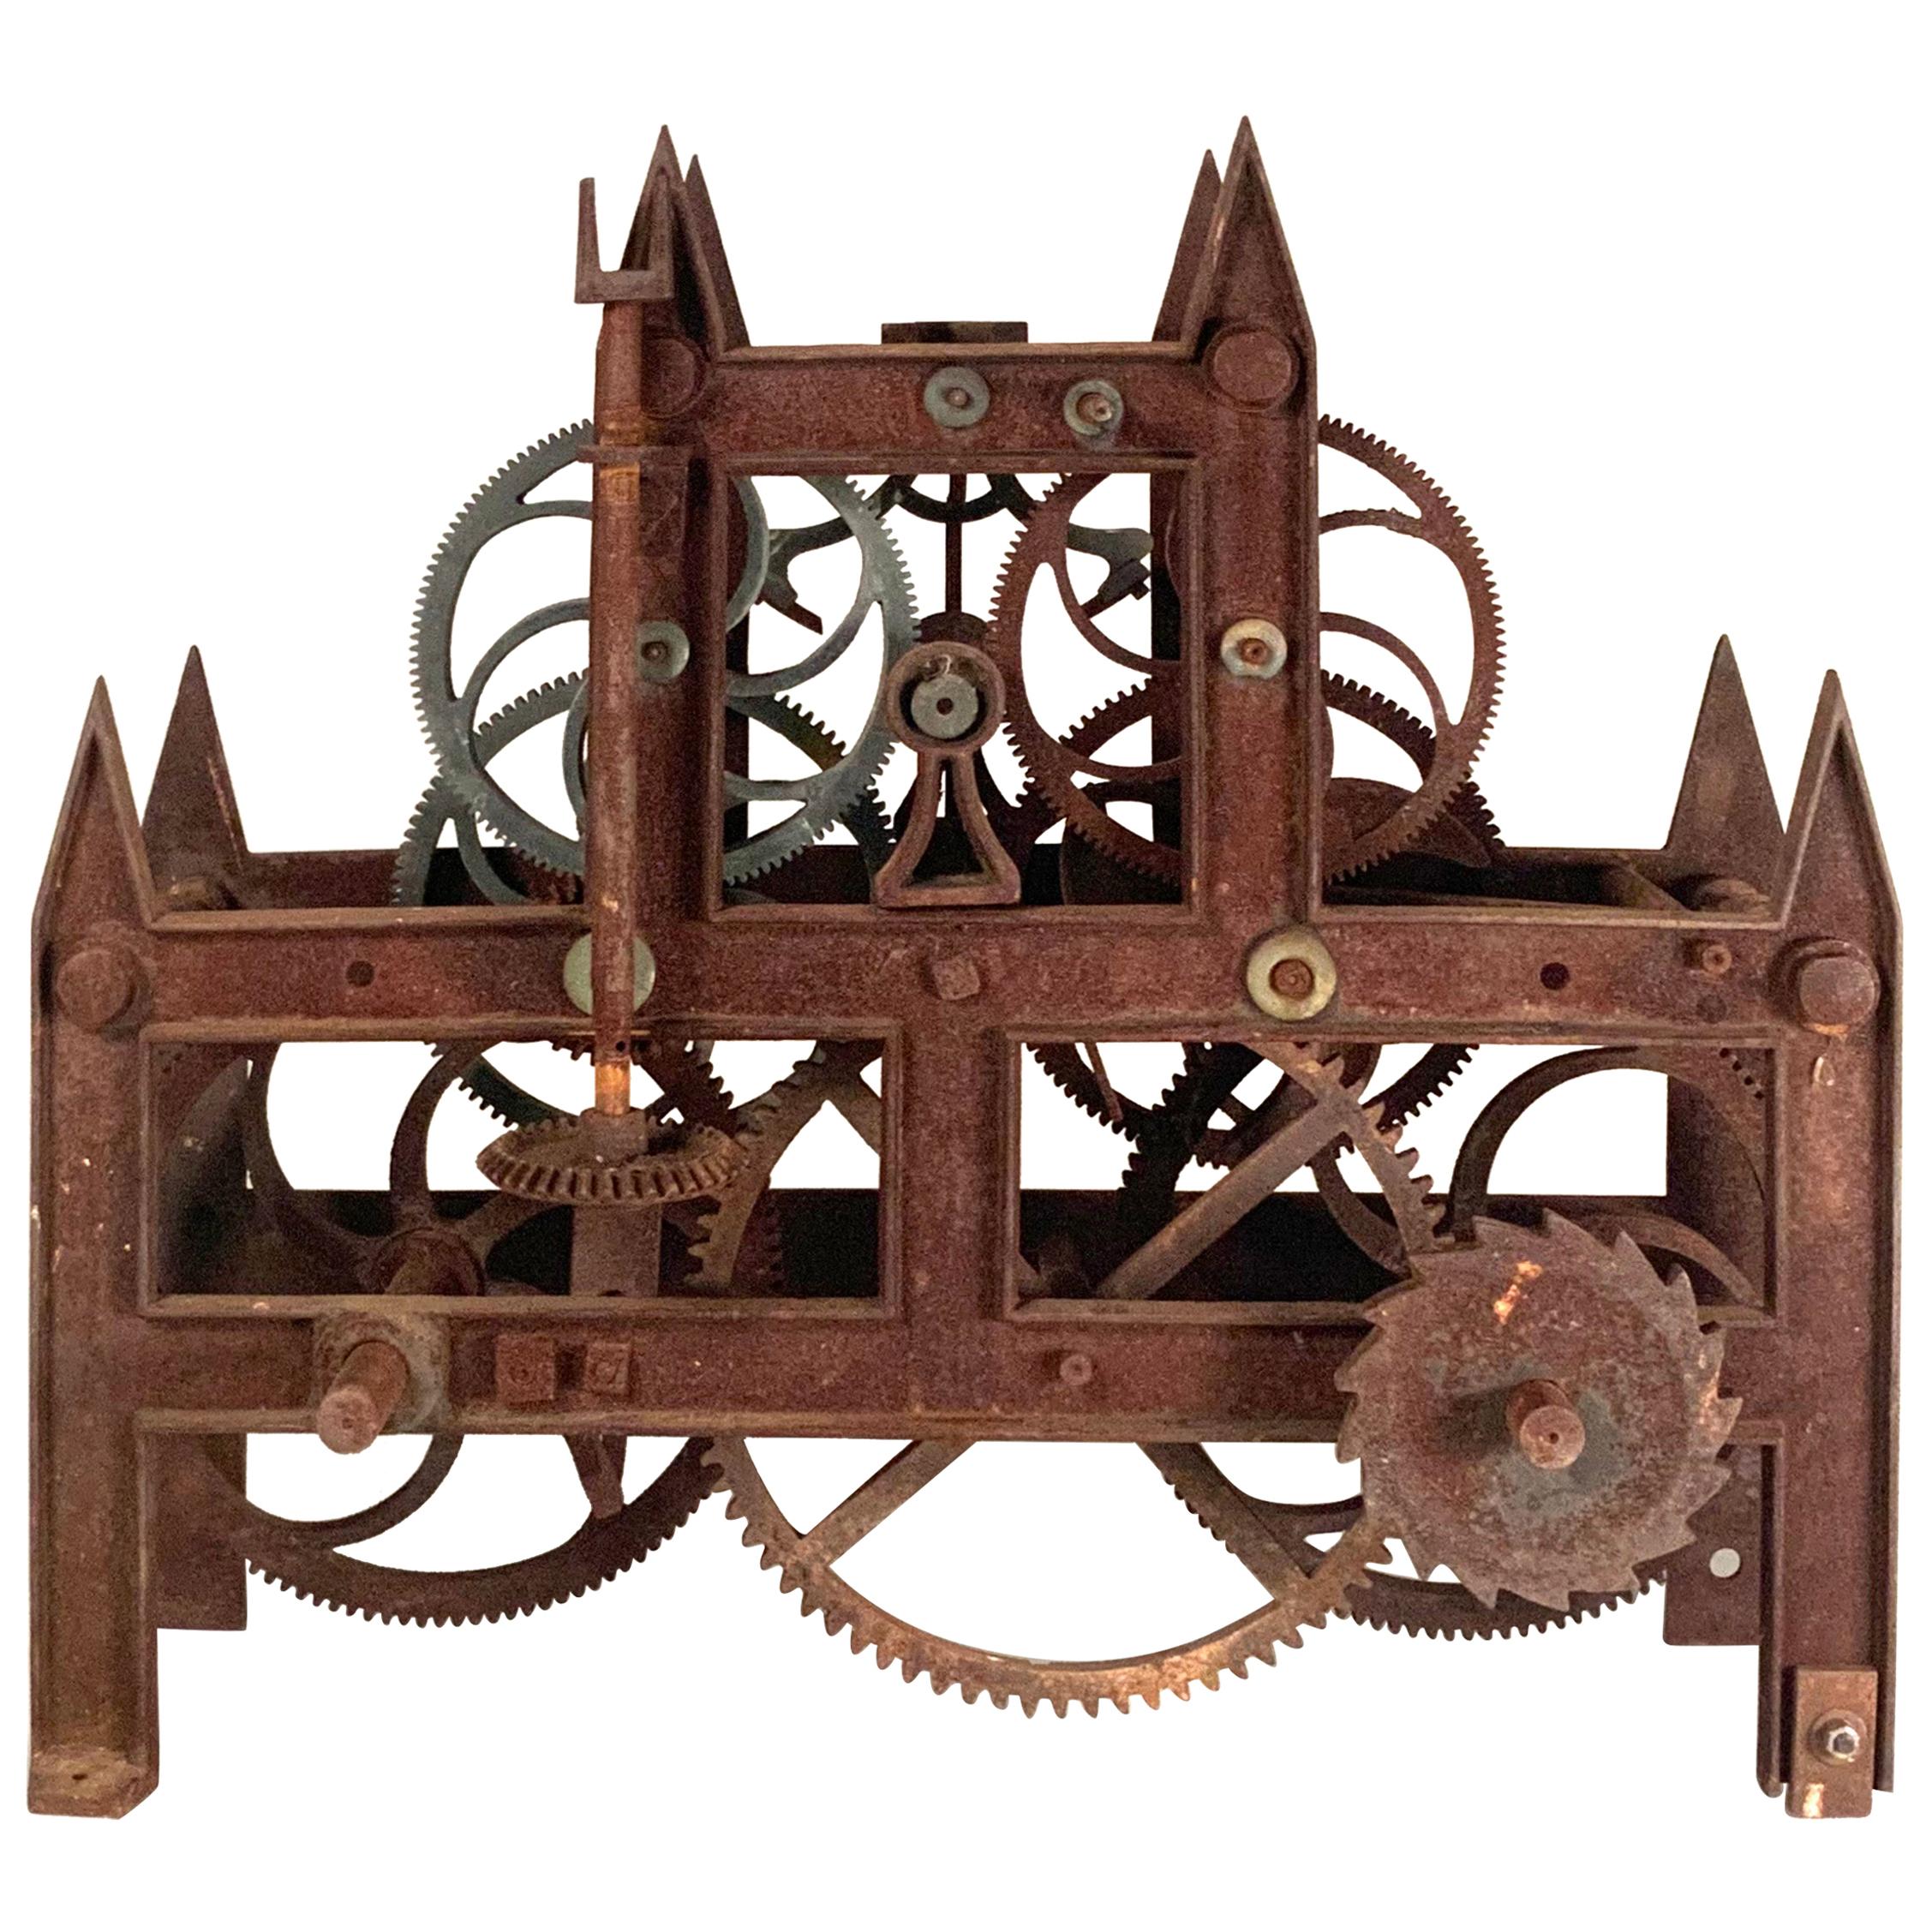 Antique 19th Century Large Iron Clockworks from a Clock Tower